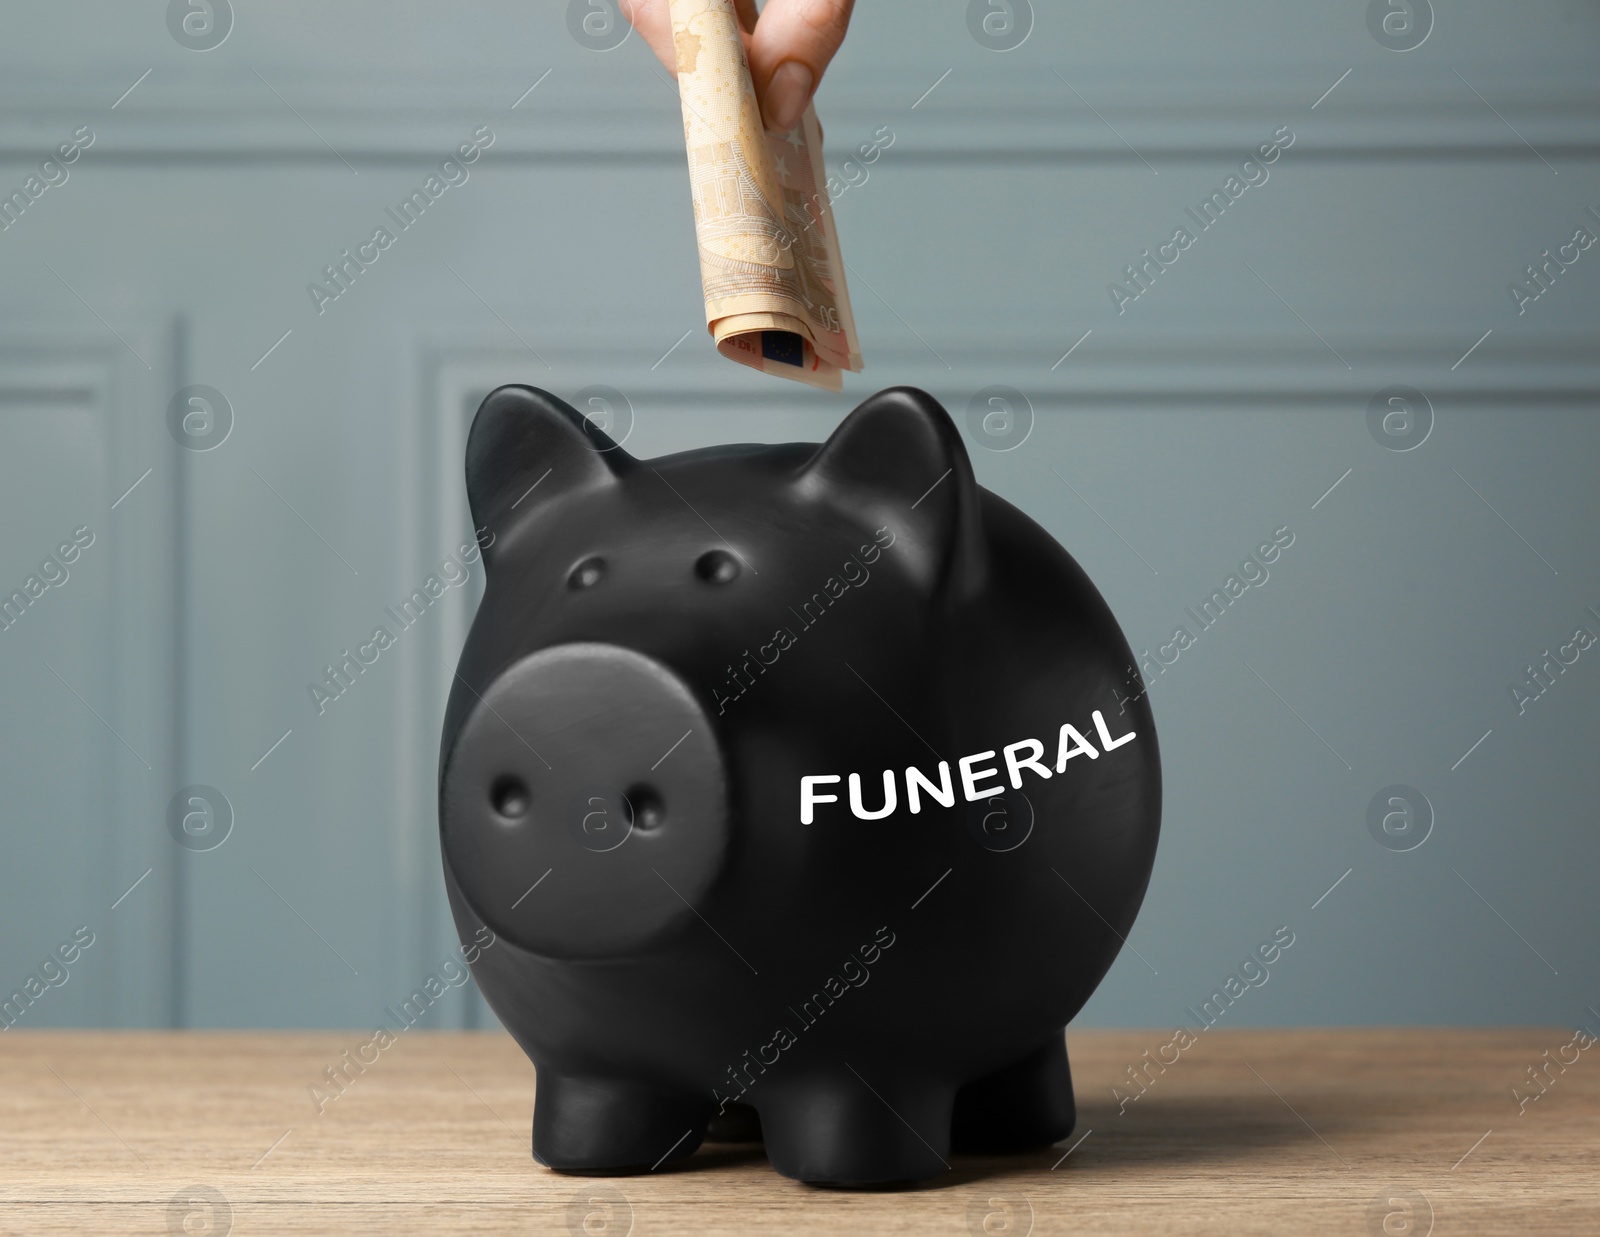 Image of Money for funeral expenses. Woman putting banknotes into black piggy bank at wooden table, closeup